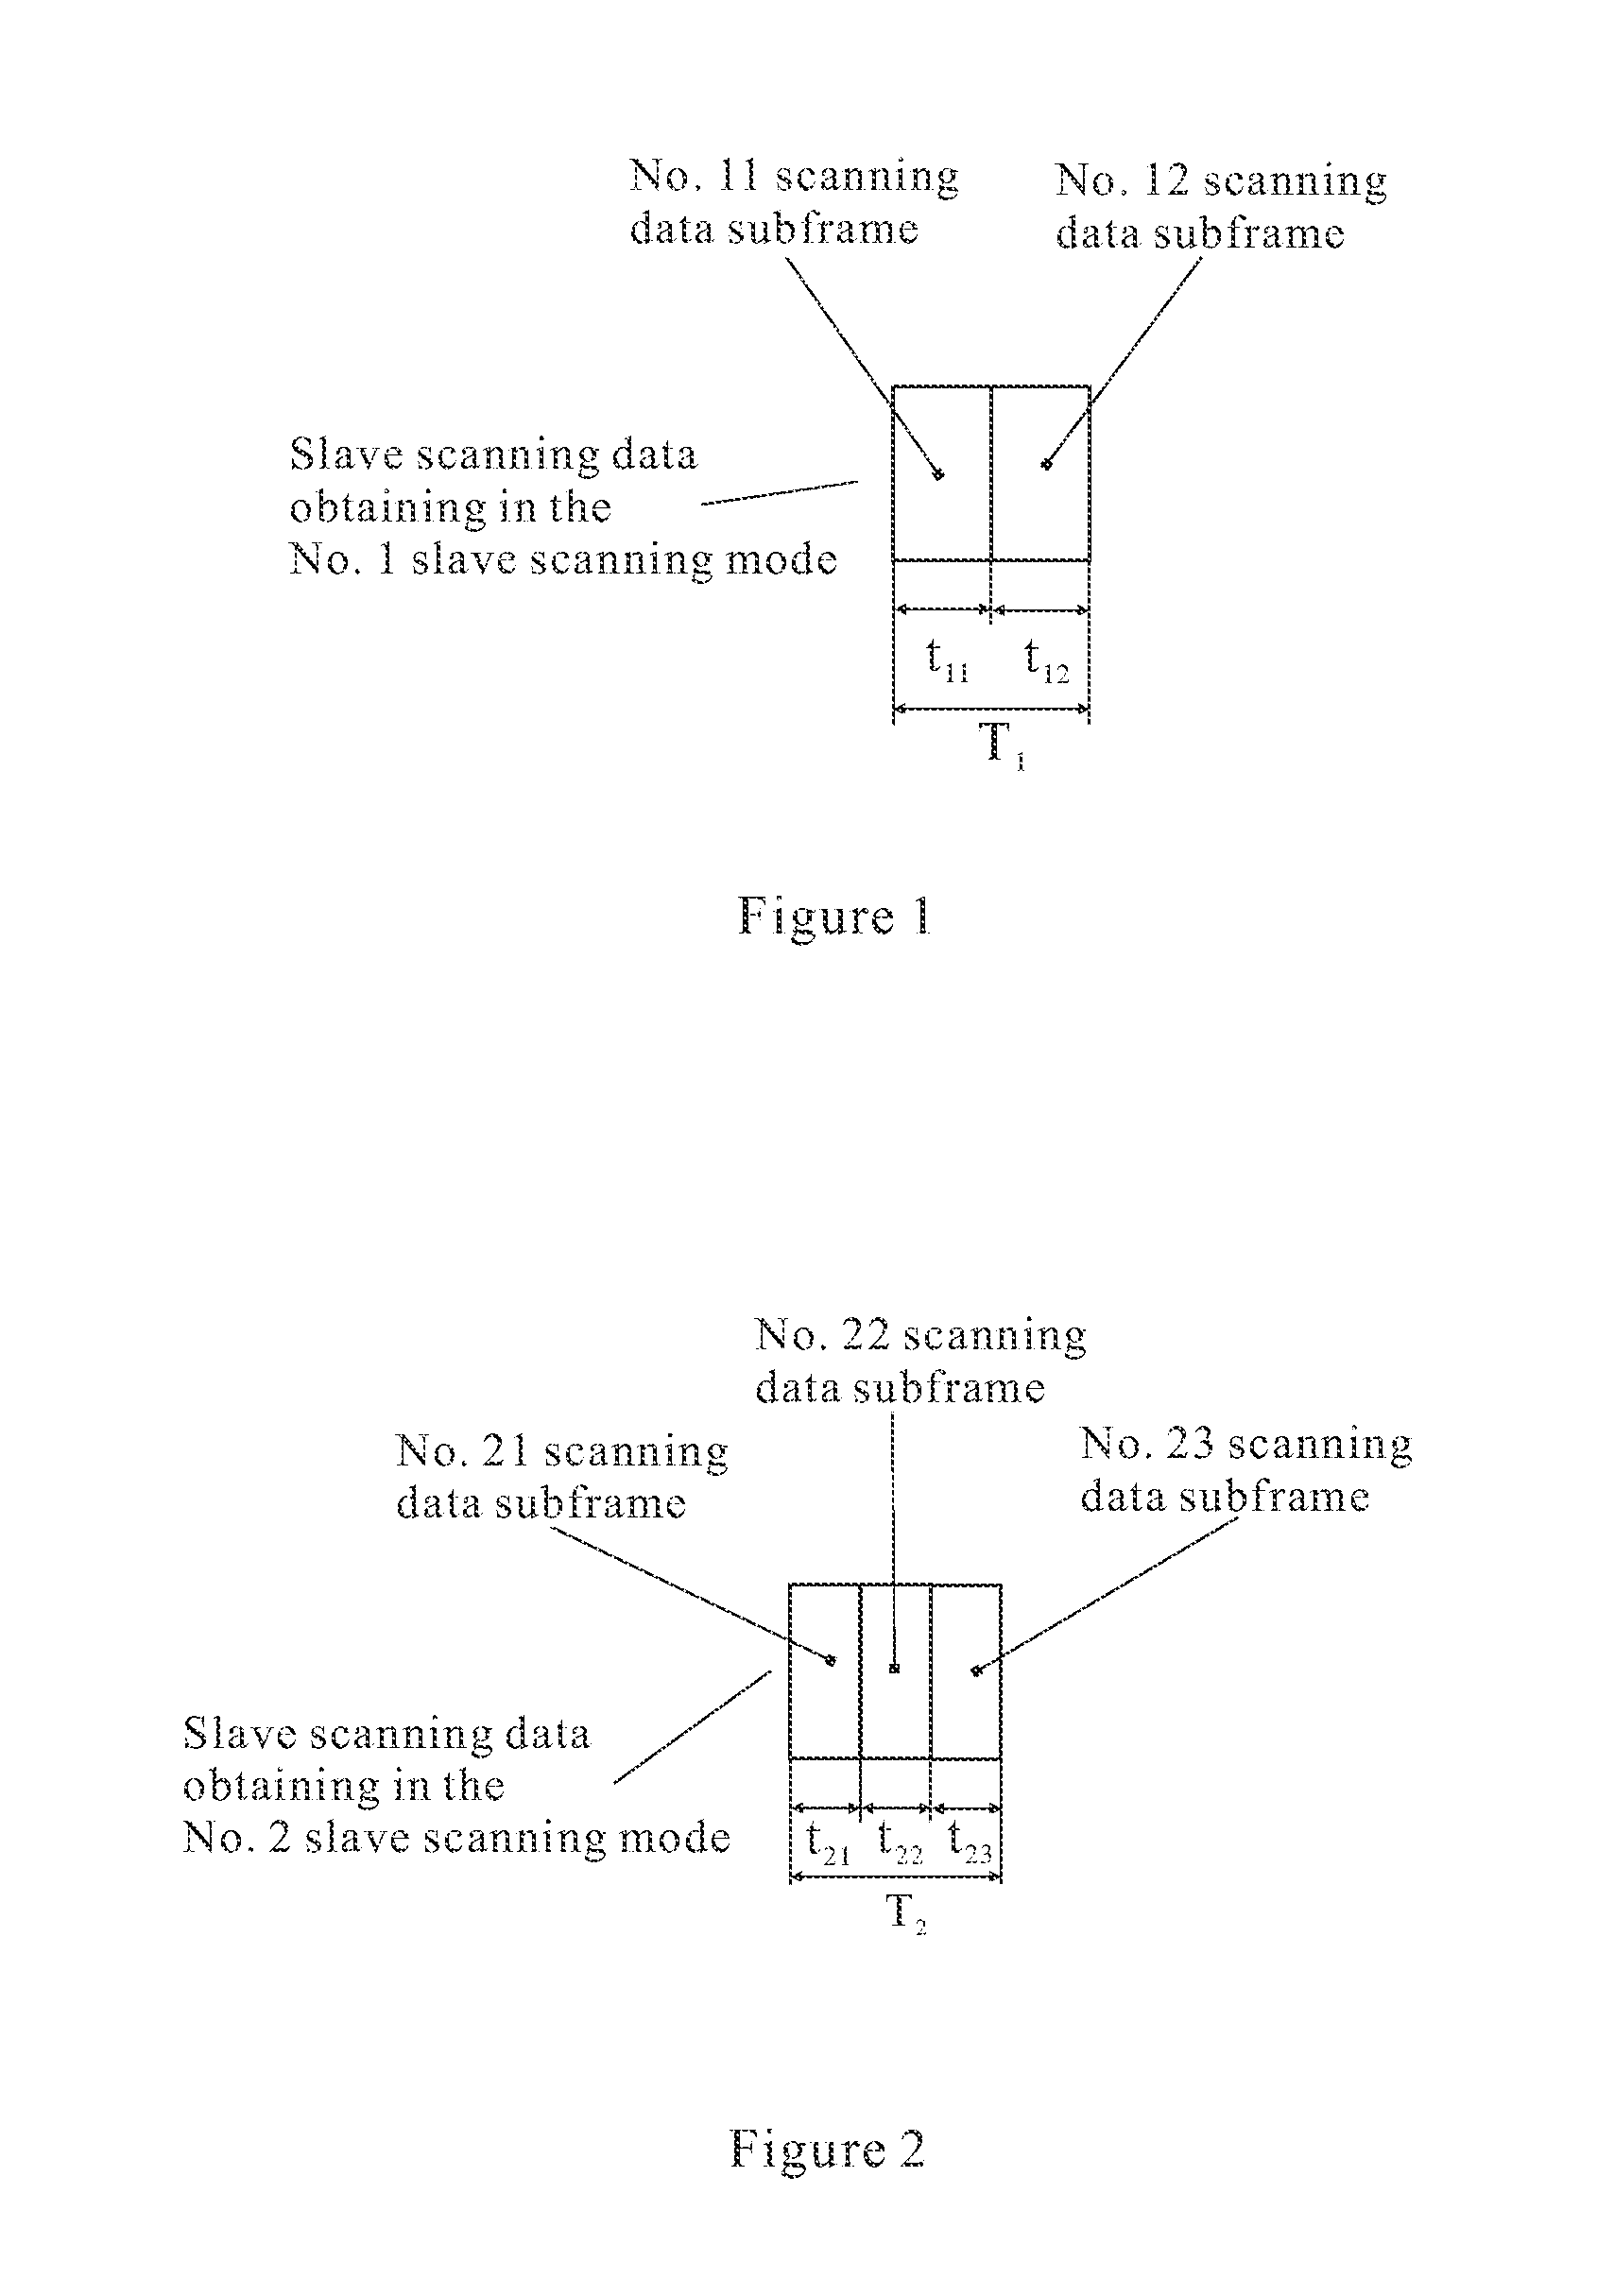 Time slot scanning method enabling the capacitive touch screen to implement multiple scanning modes